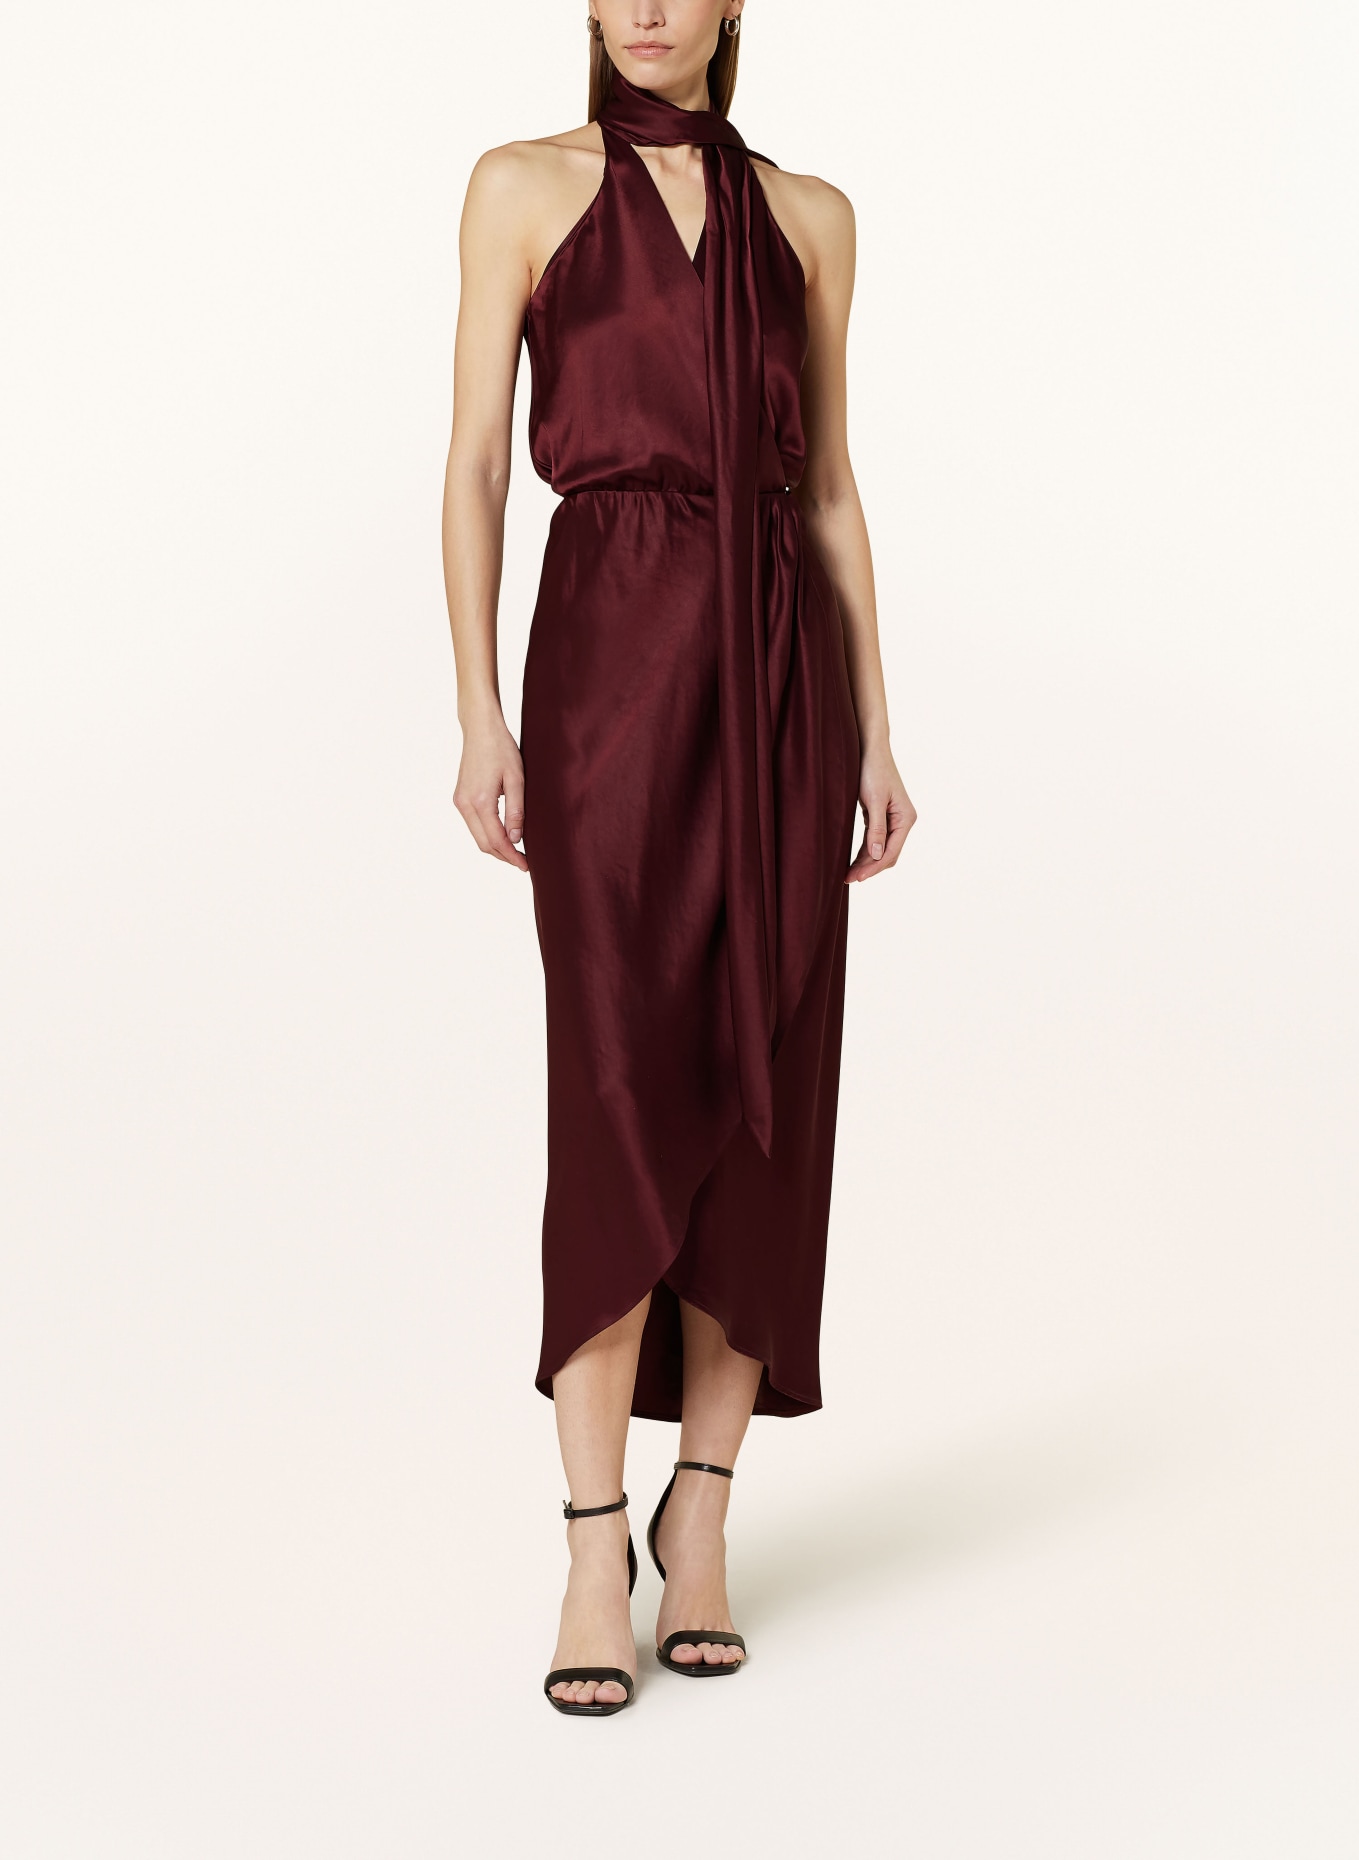 REISS Bow-tie collar dress TAYLA in satin, Color: 64 BURGUNDY (Image 2)